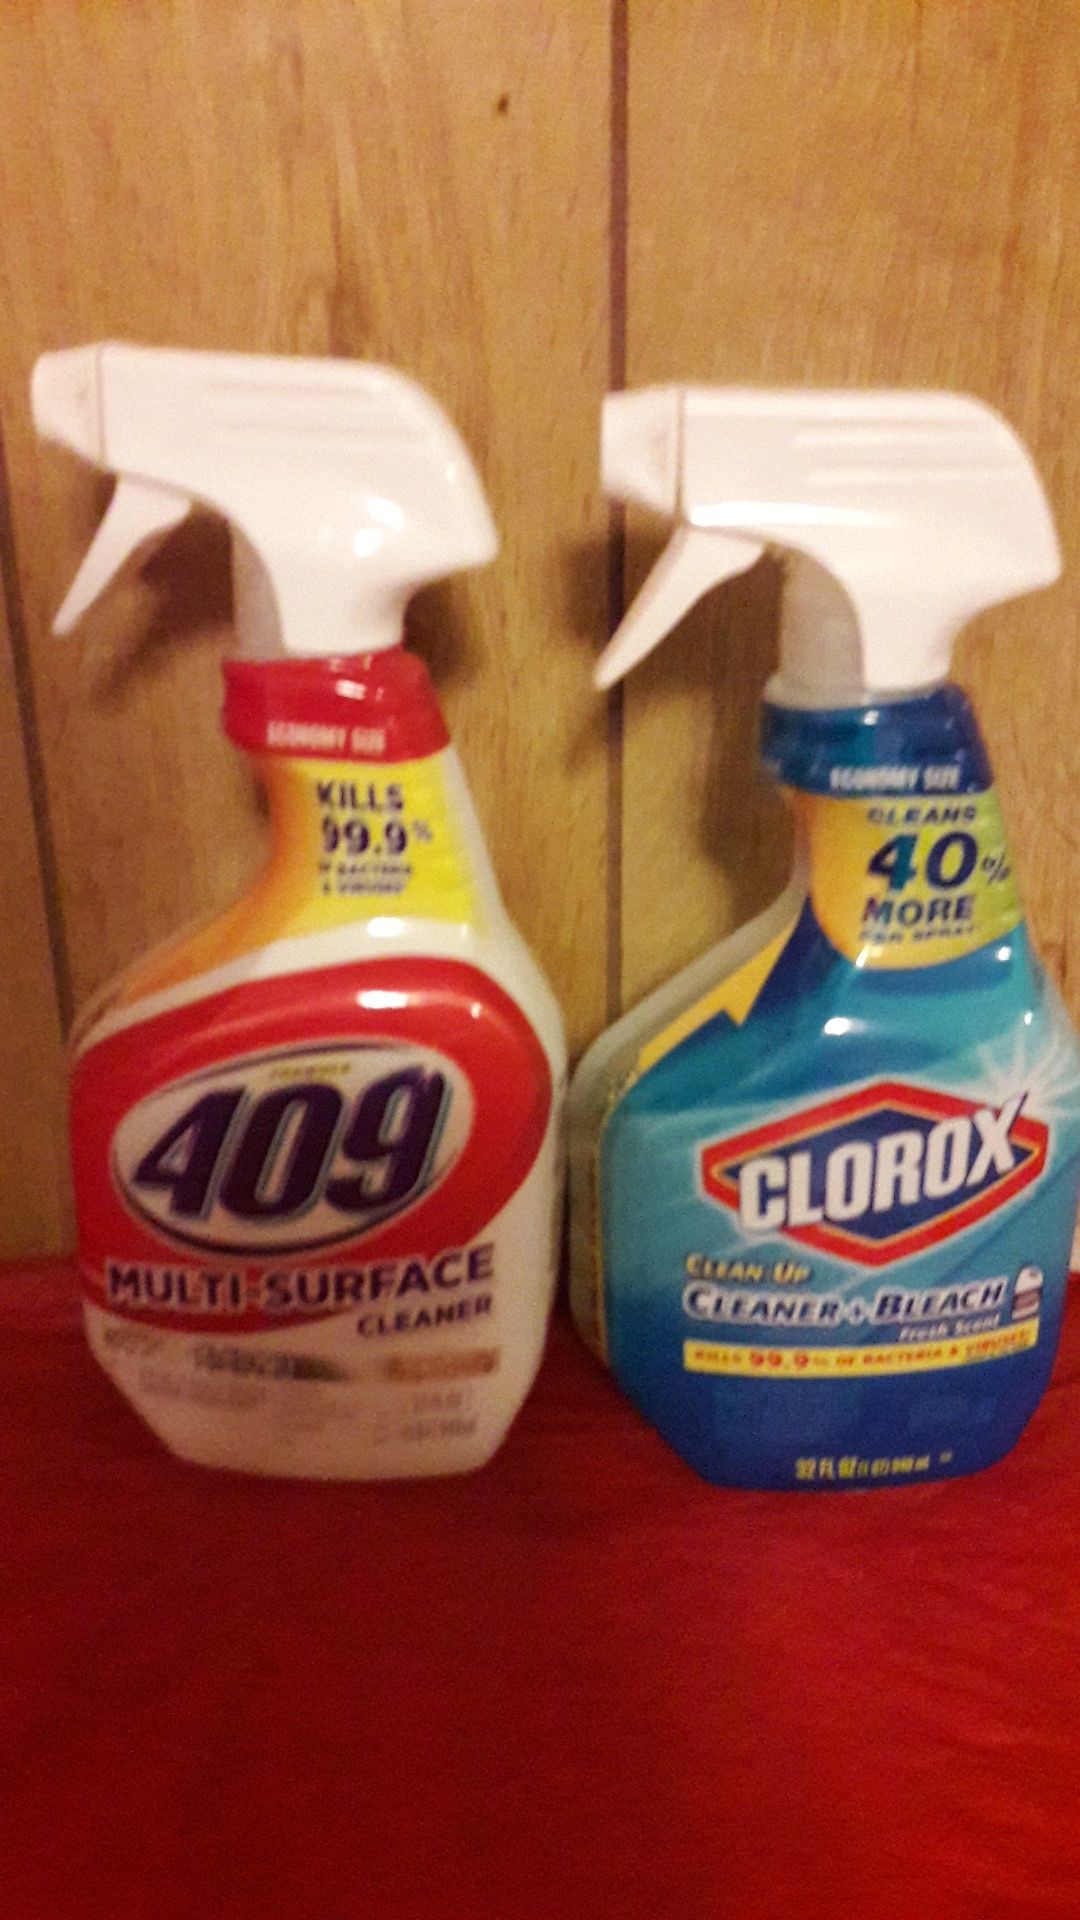 NEW Multi Surface Cleaners. 2 for $5